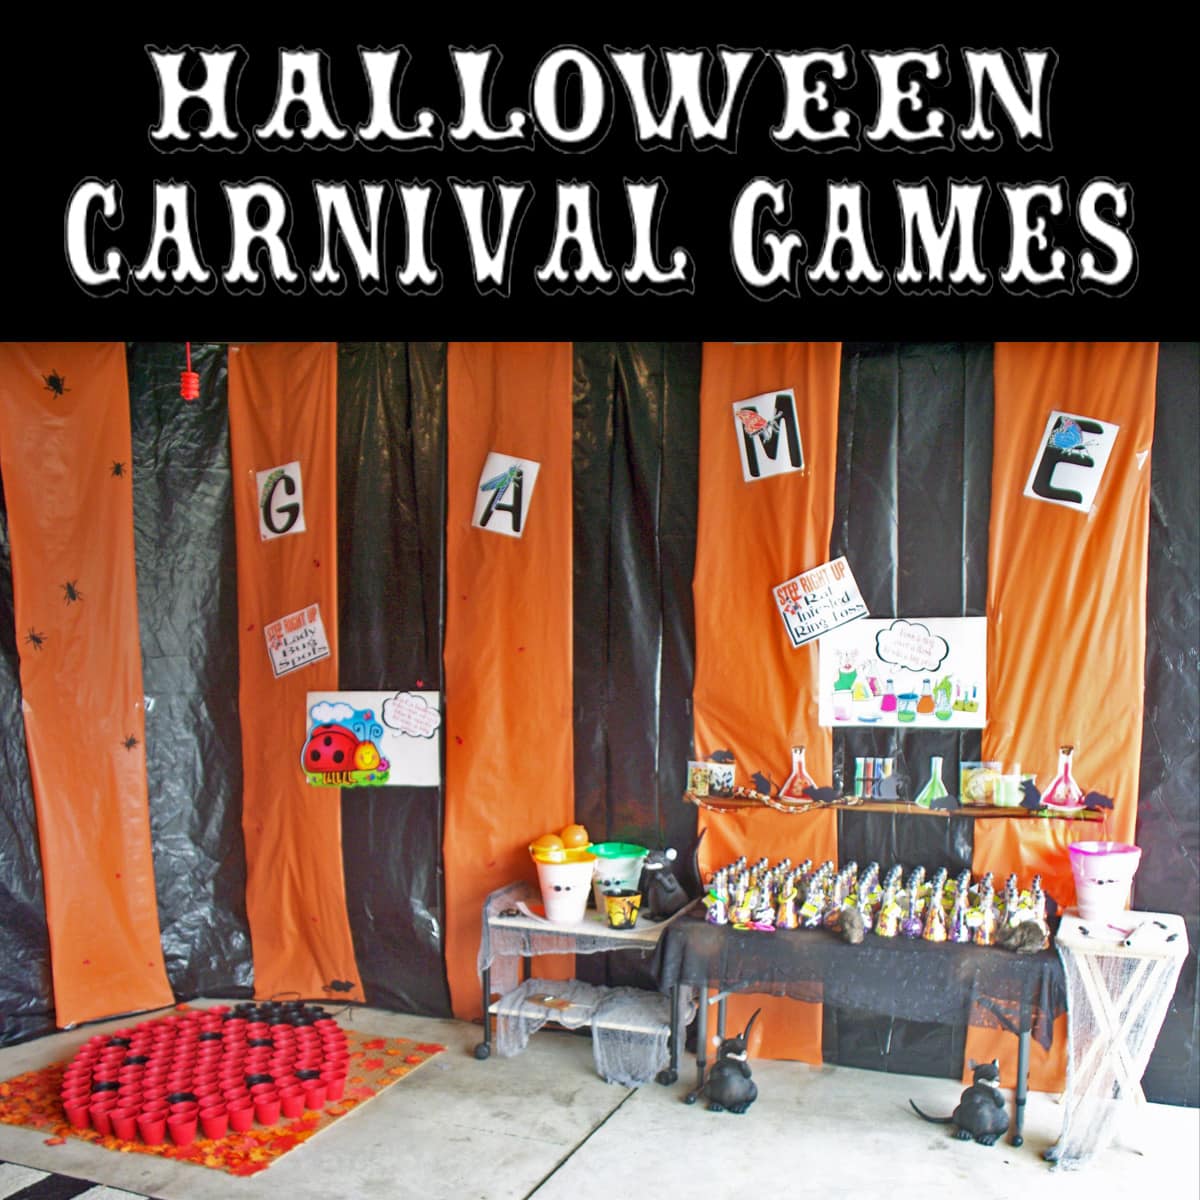 Halloween Carnival Games image featuring a ladybug balloon toss and a rat infested ring toss game.